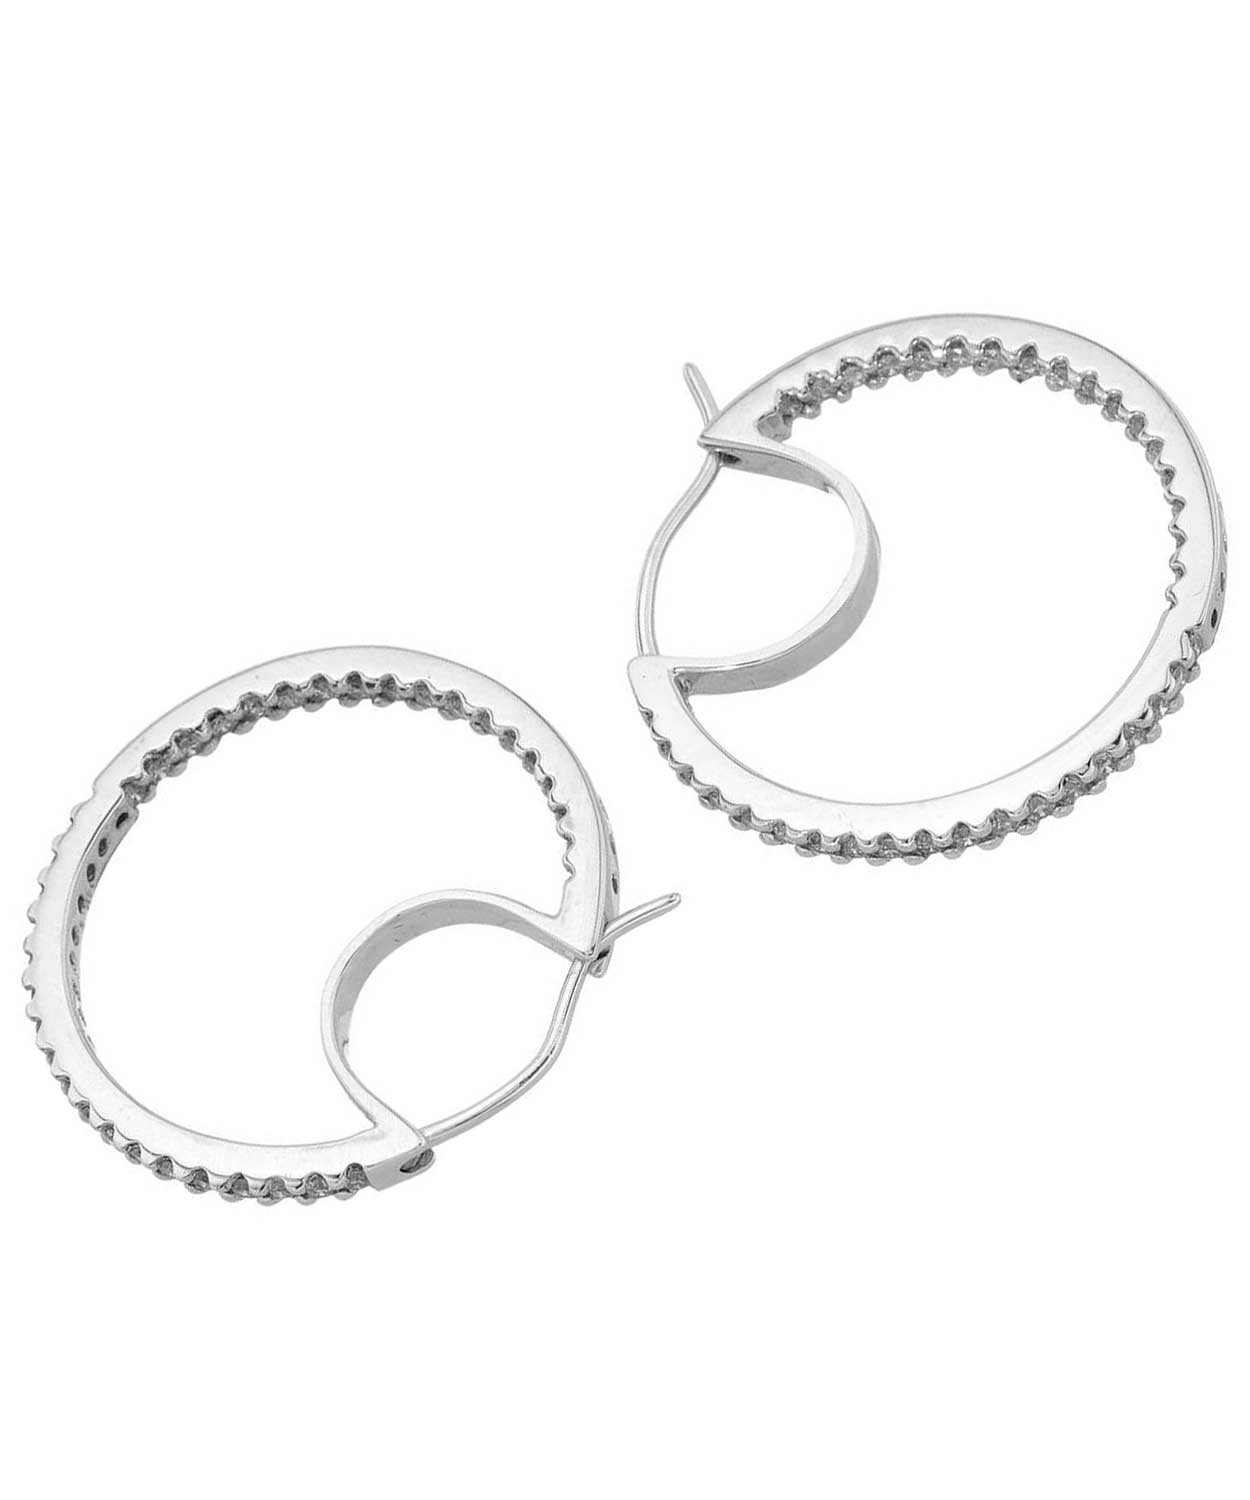 Allure Collection 0.75 ctw Diamond 14k White Gold Inside-Out Hoop Earrings View 2